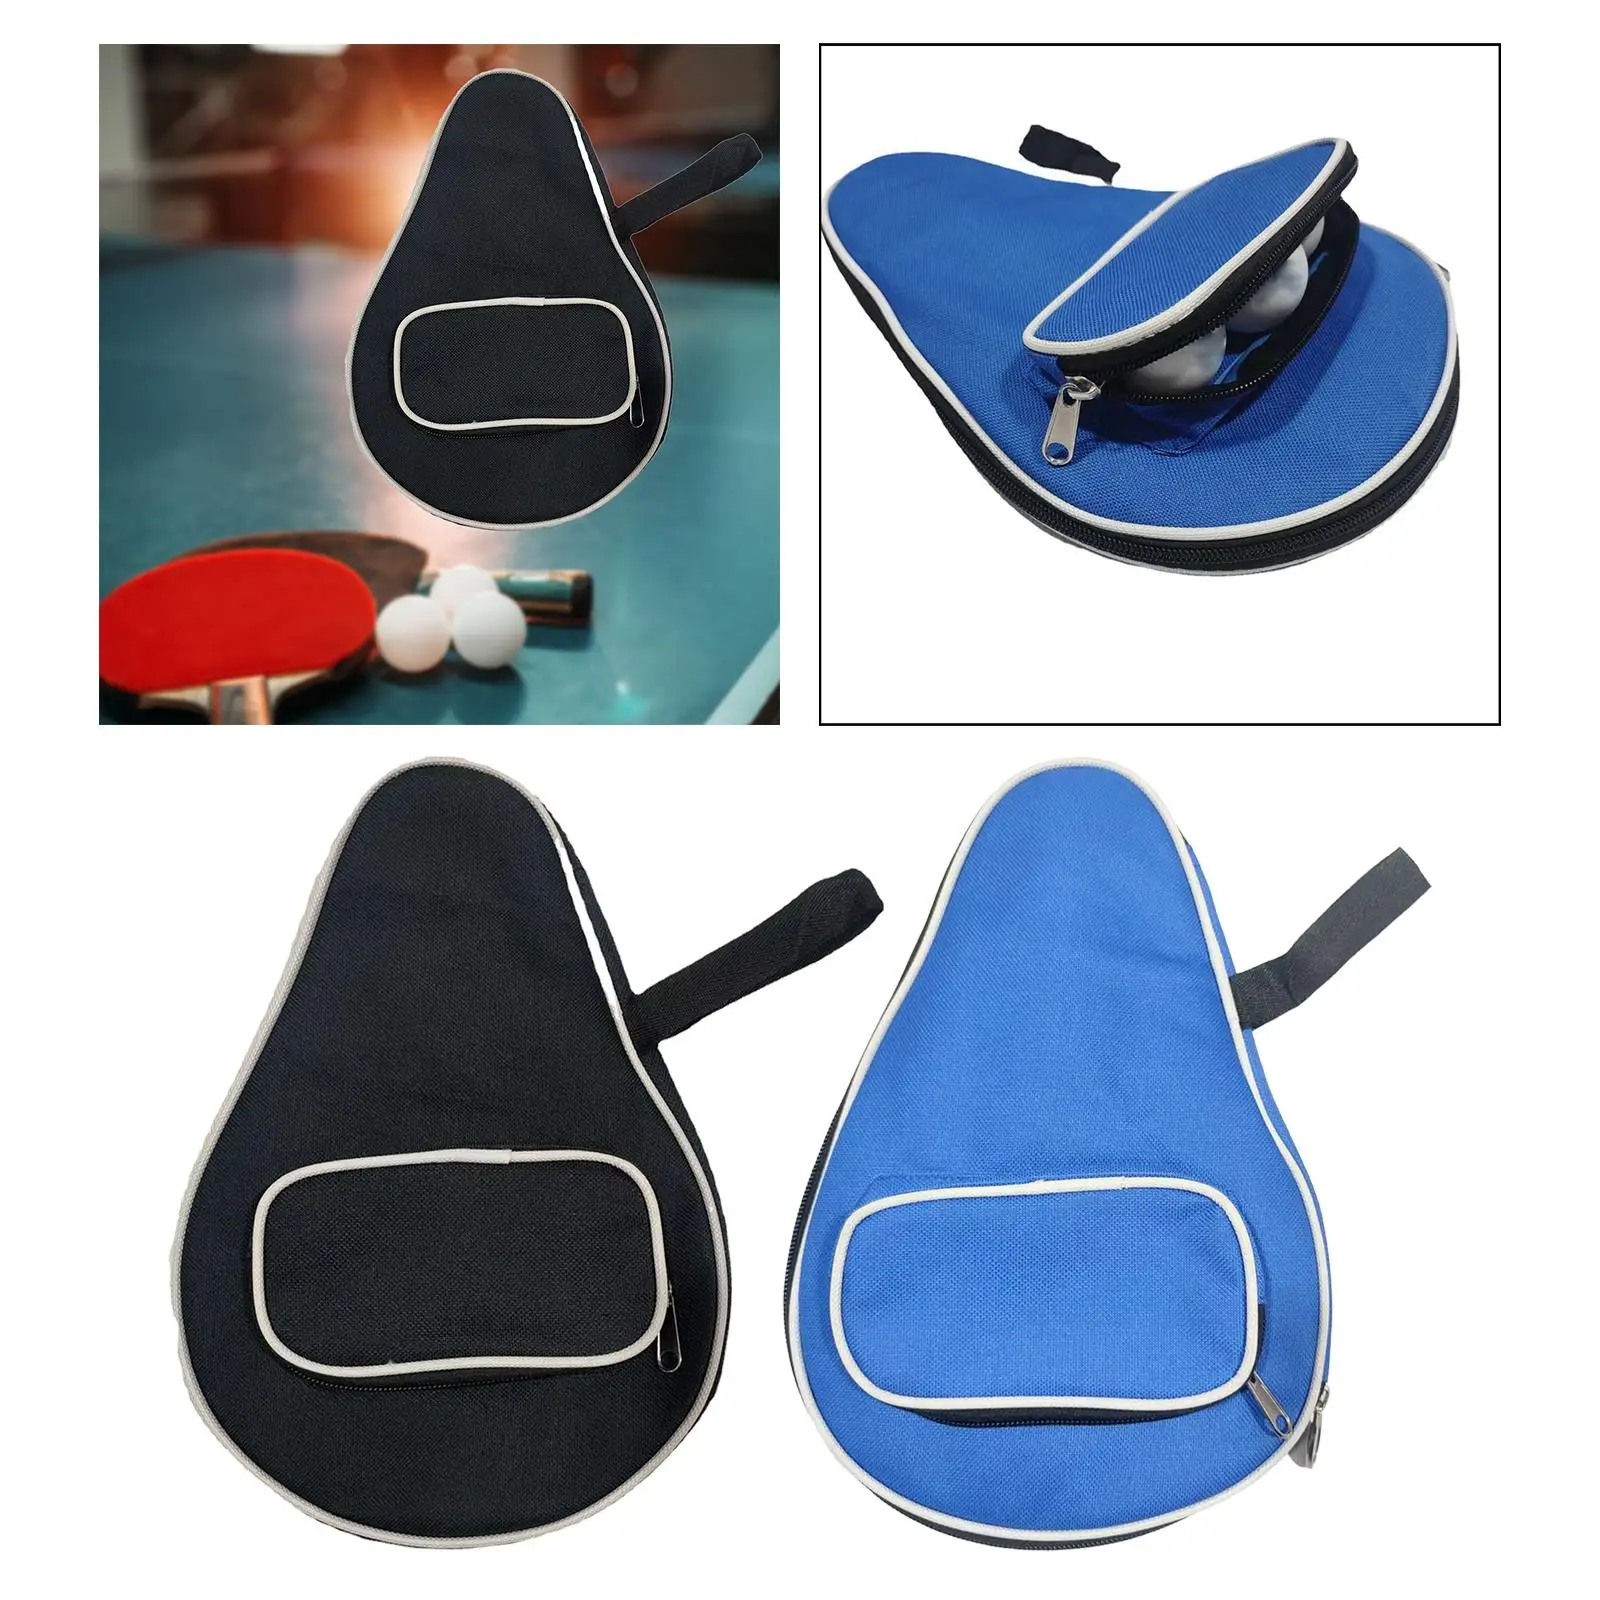 Table Tennis Racket Cover Wear Resistant Reusable Outdoors Professional Racket Organizer for Training Competition Travel Indoor